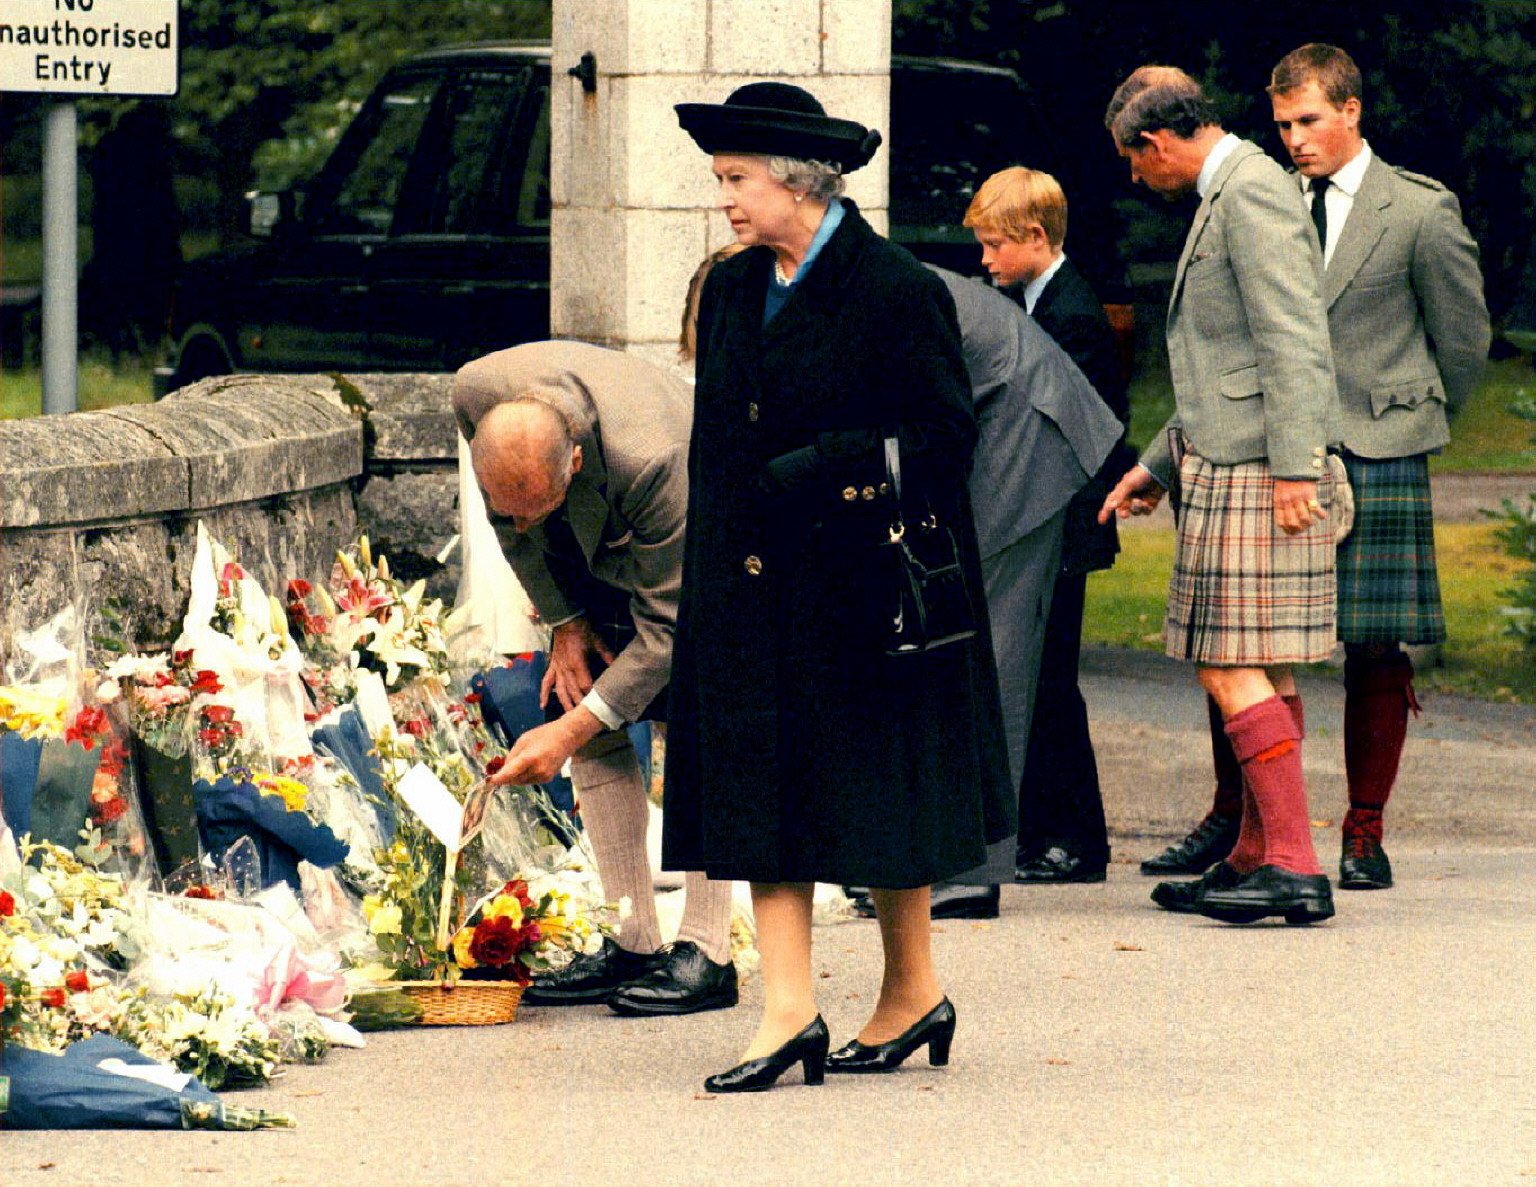 Queen Elizabeth and the royal family visit growing memorial outside Balmoral after Princess Diana's death